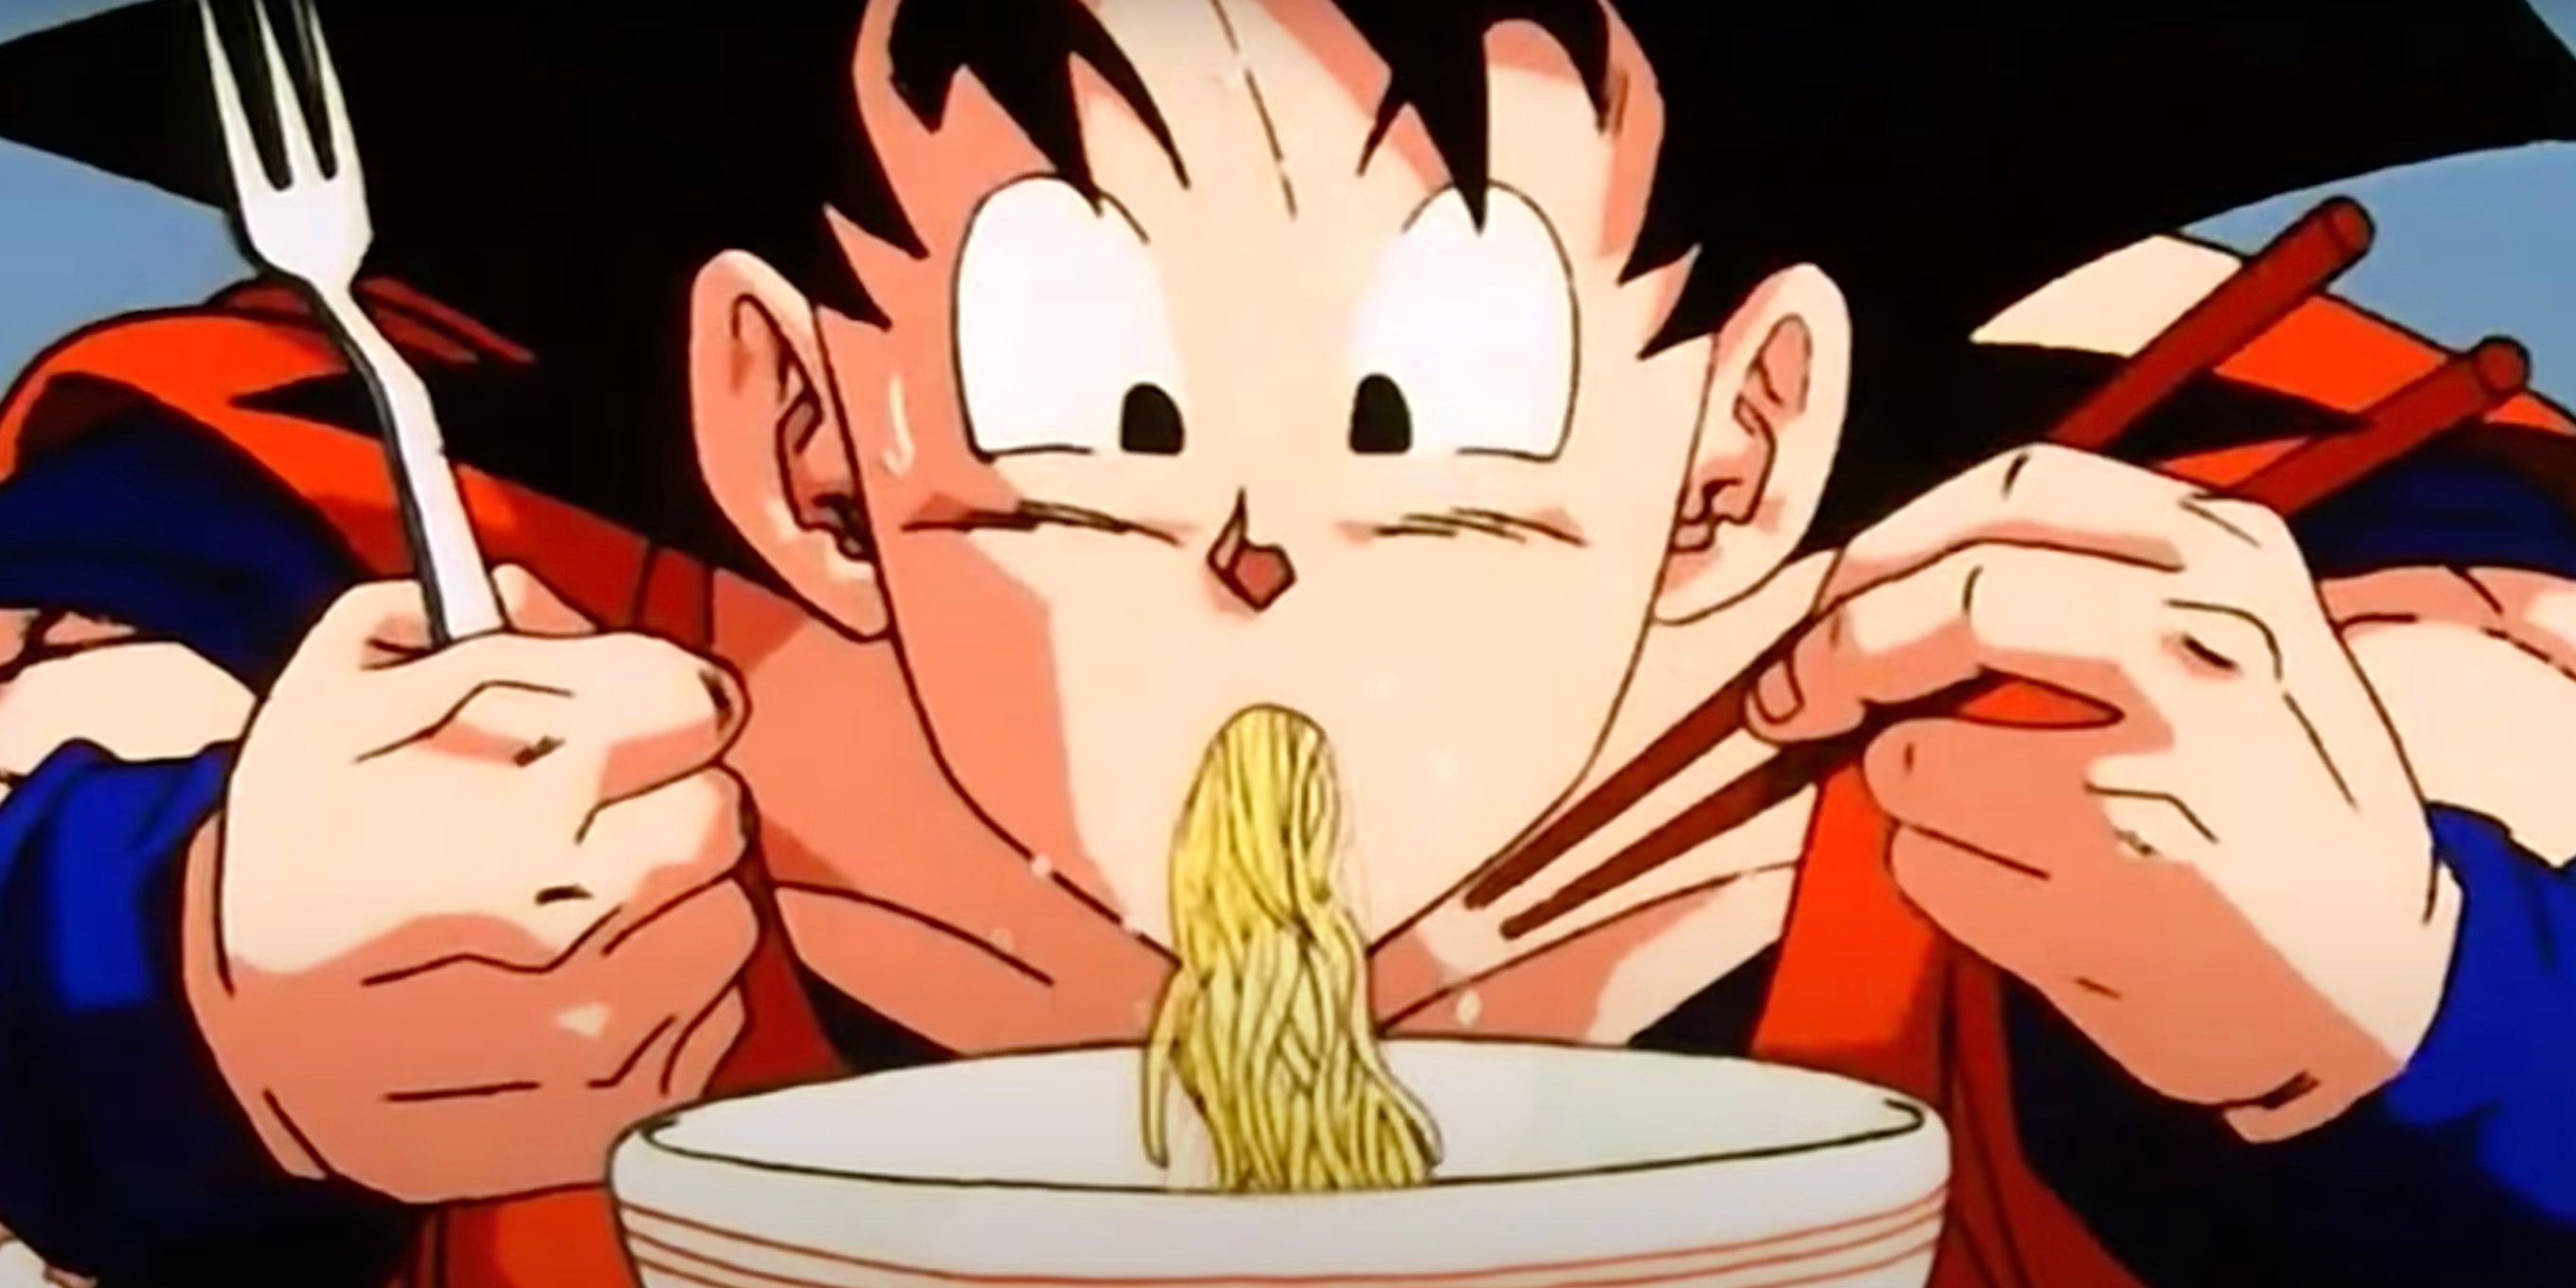 Goku from Dragon Ball Z Eating a Bowl of Noodles